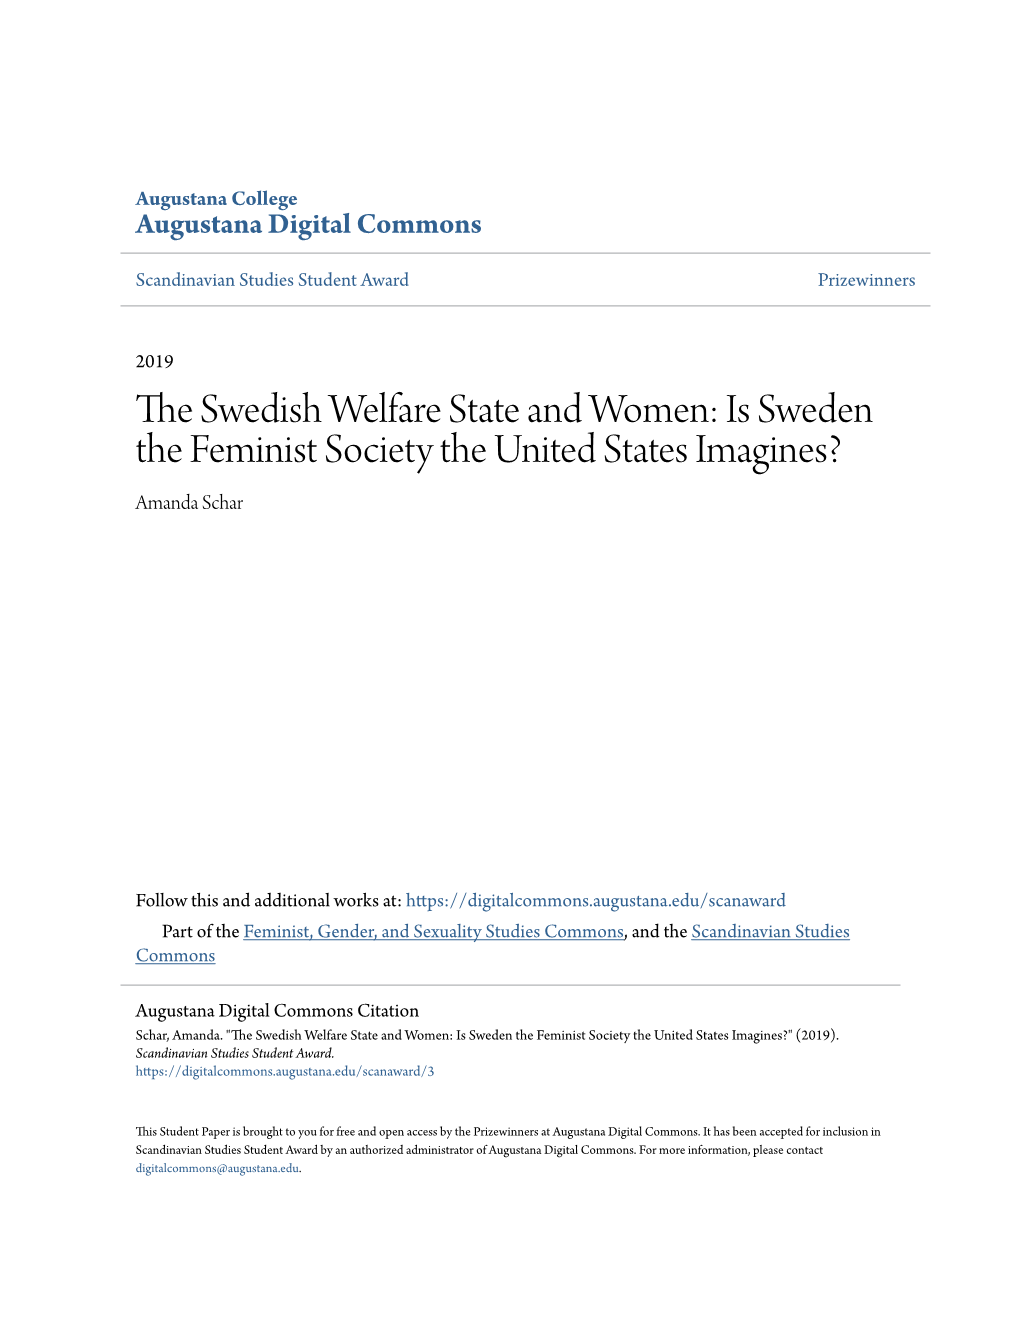 The Swedish Welfare State and Women: Is Sweden the Feminist Society the United States Imagines?